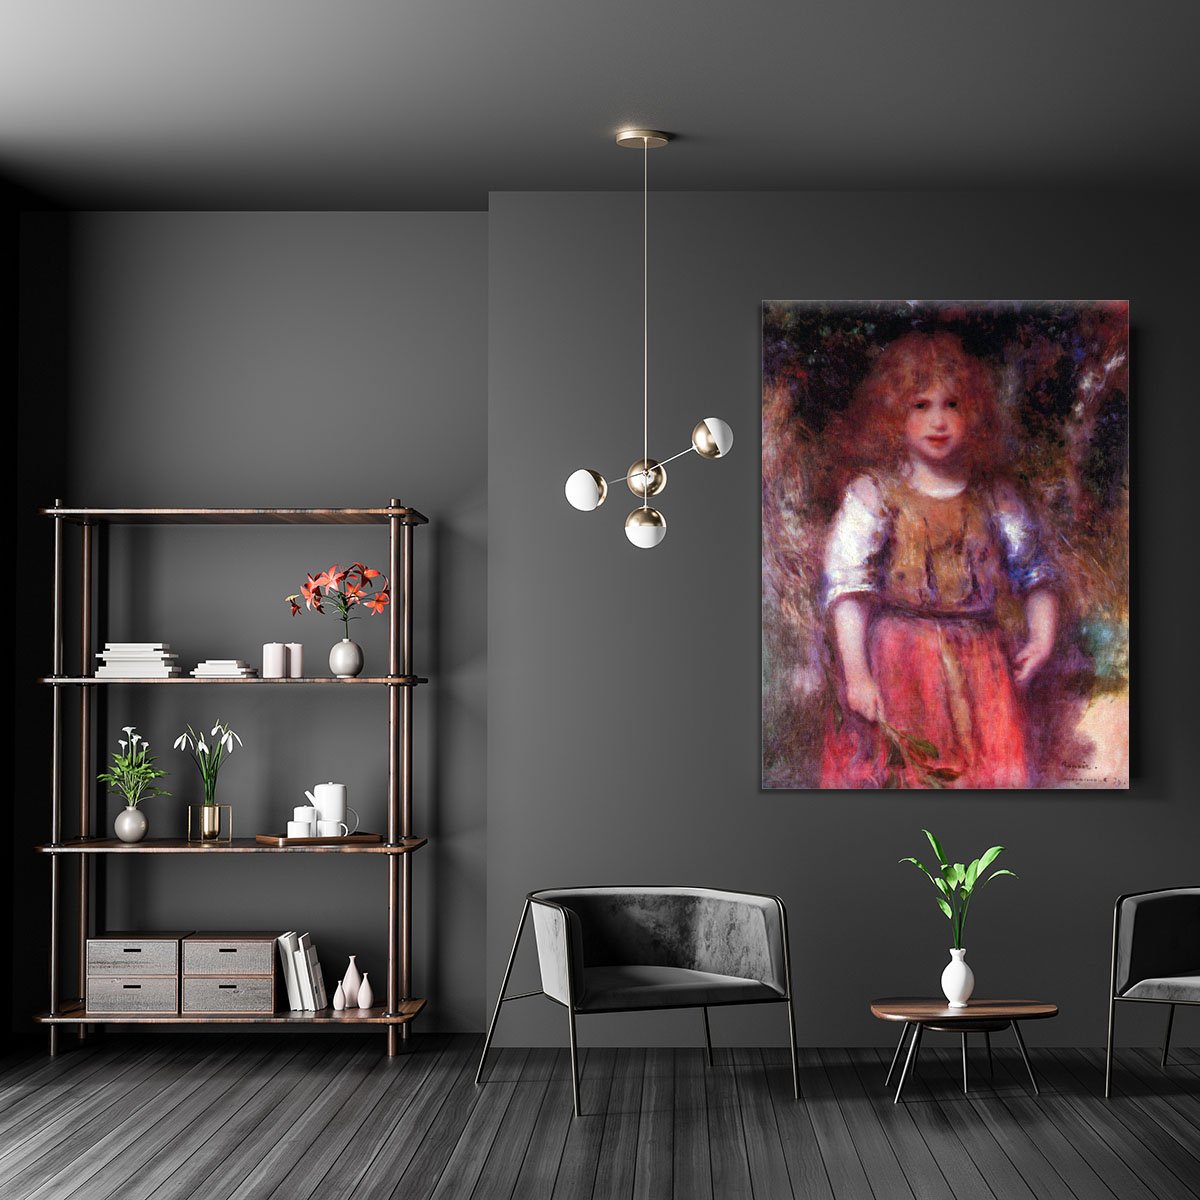 Gypsy girl by Renoir Canvas Print or Poster